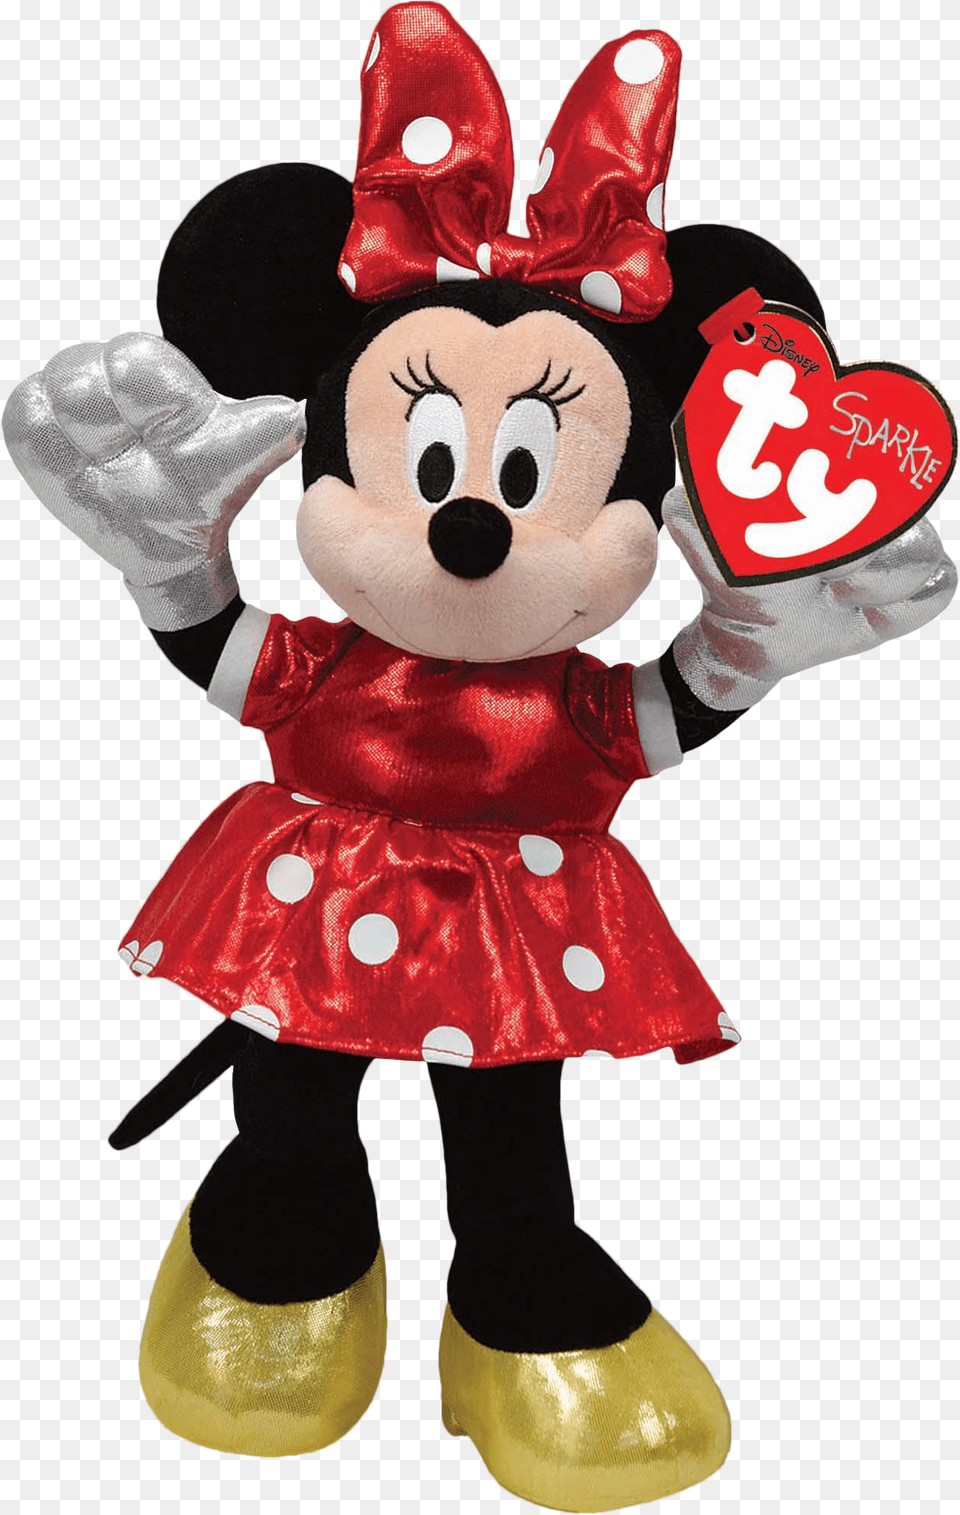 Minnie Mouse Teddy Bear Hd, Clothing, Glove, Doll, Toy Png Image